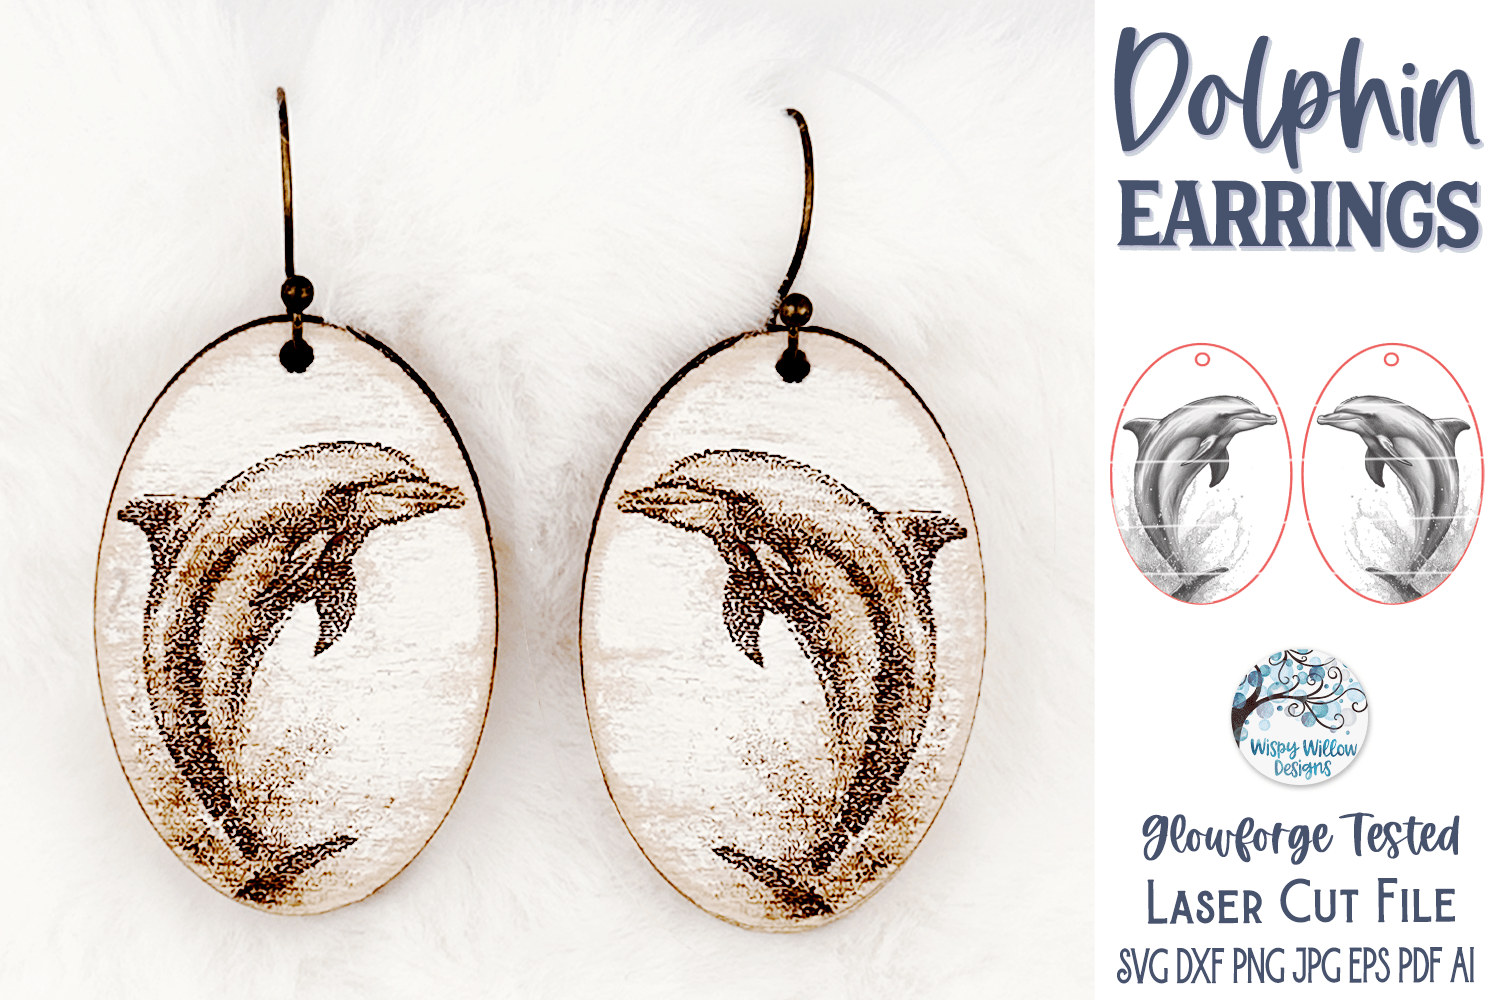 Dolphin Earring File for Glowforge or Laser Cutter Wispy Willow Designs Company